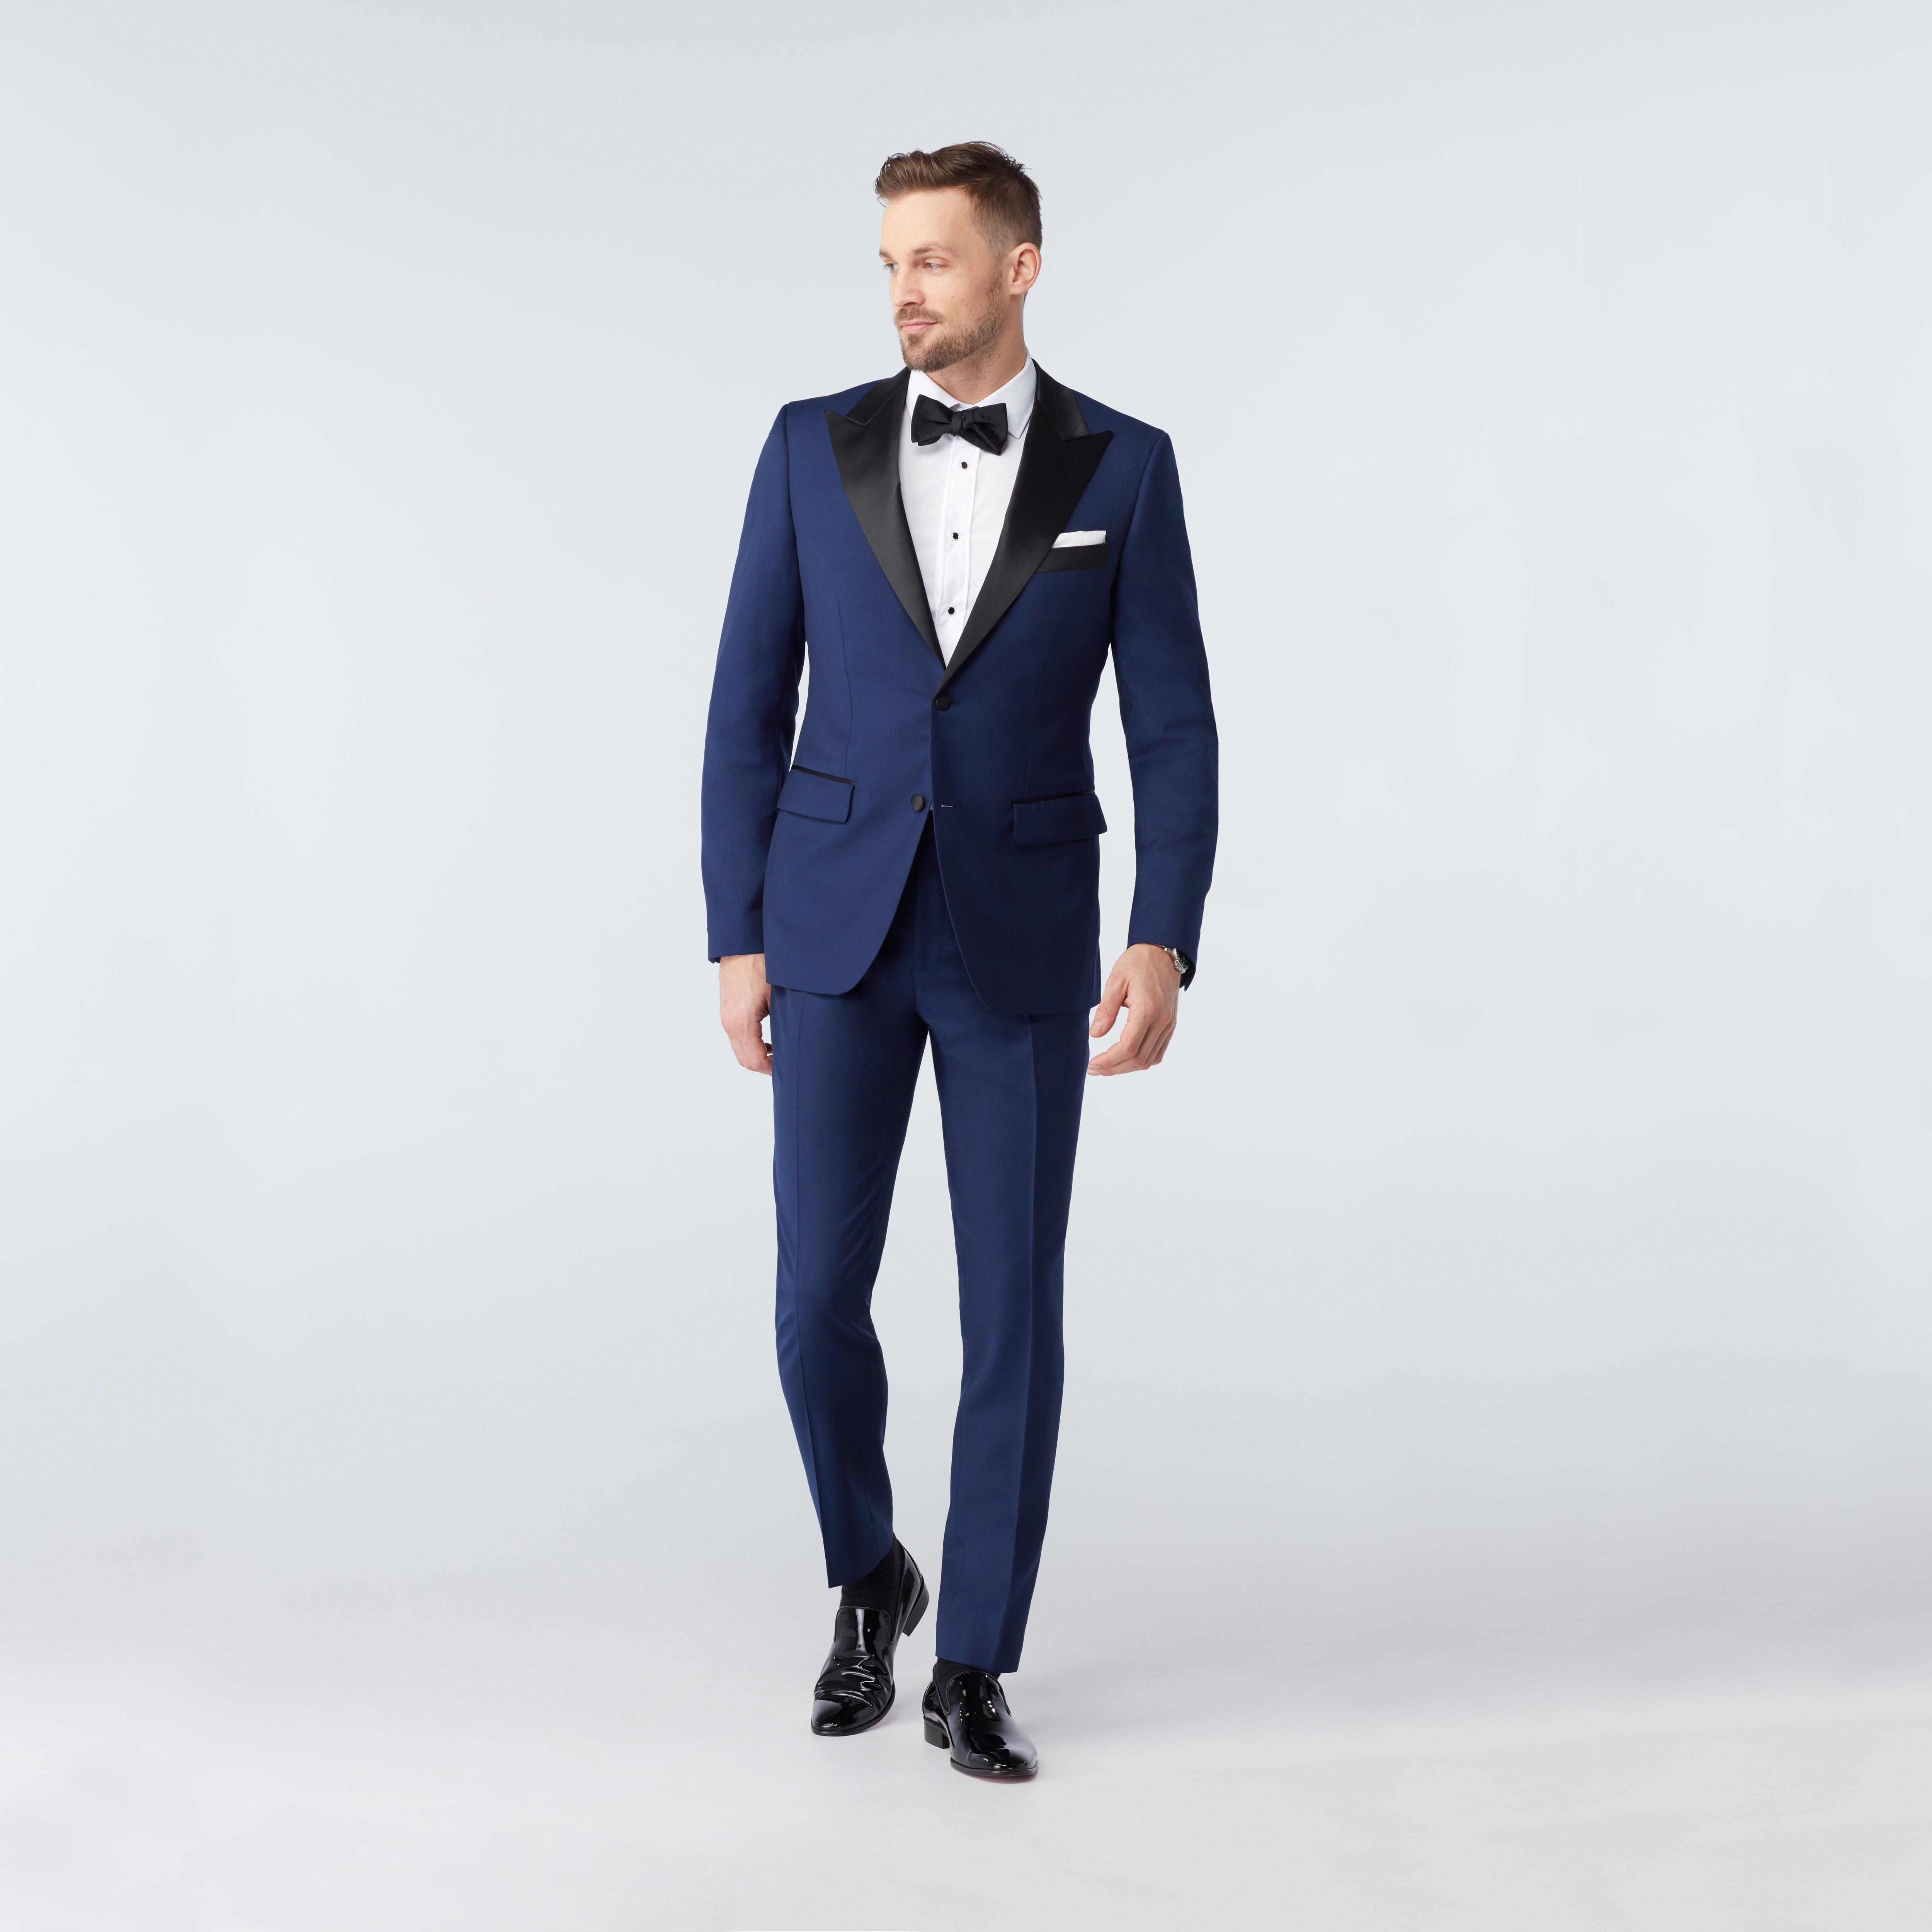 Custom Suits Made For You - Highworth Navy Tuxedo | INDOCHINO